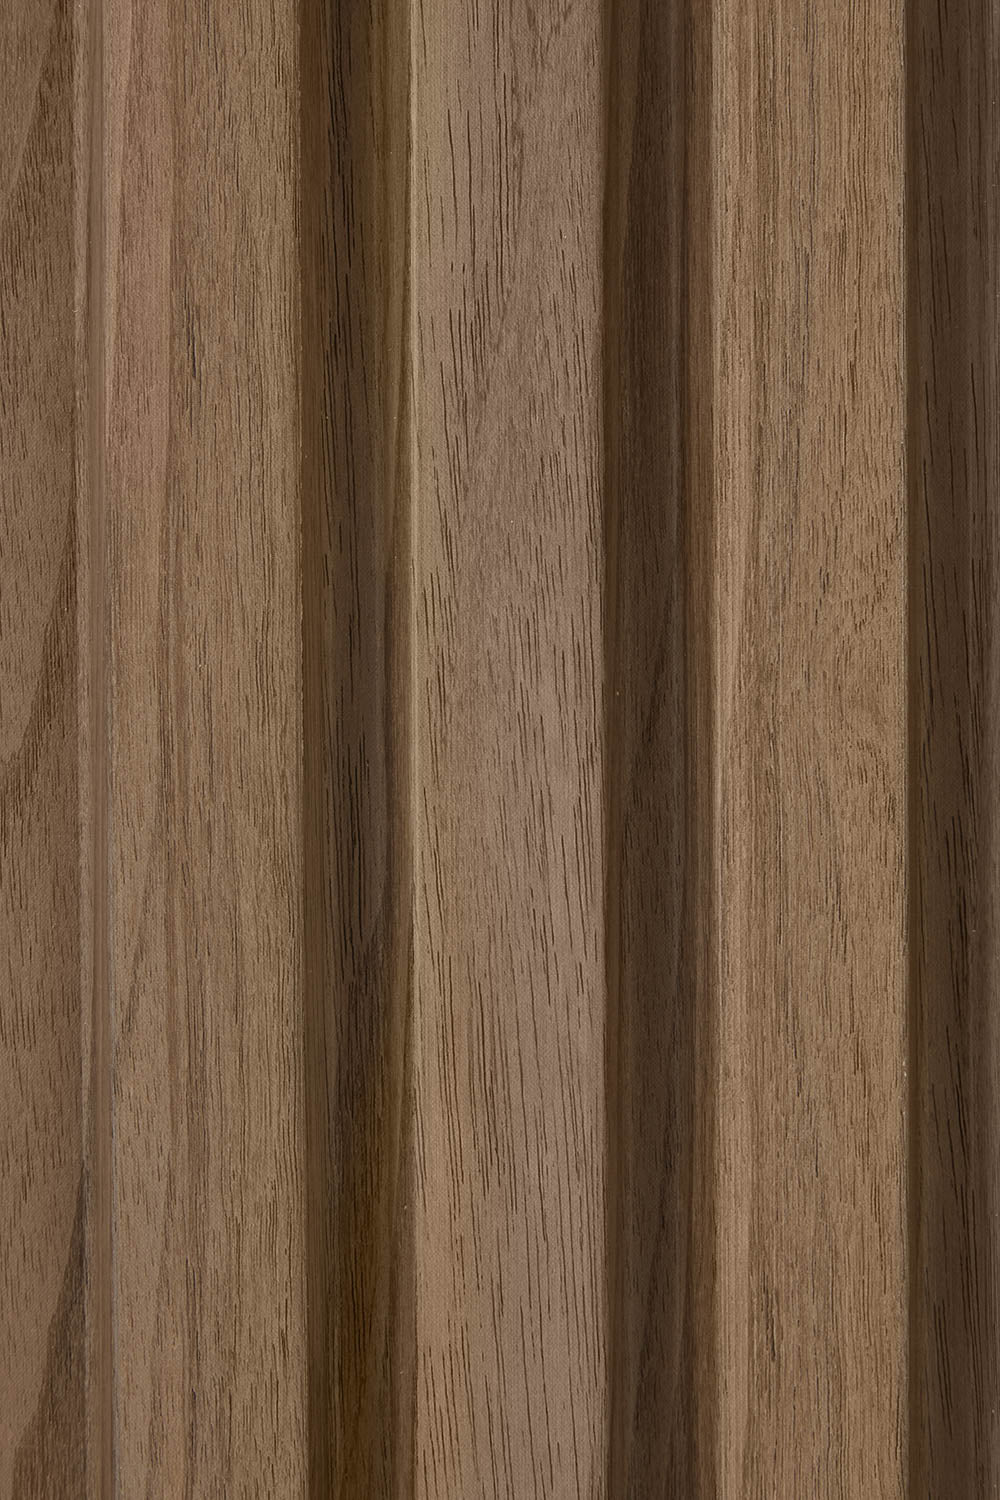 Close up of waterproof slatwall panel in walnut from Naturewall.

